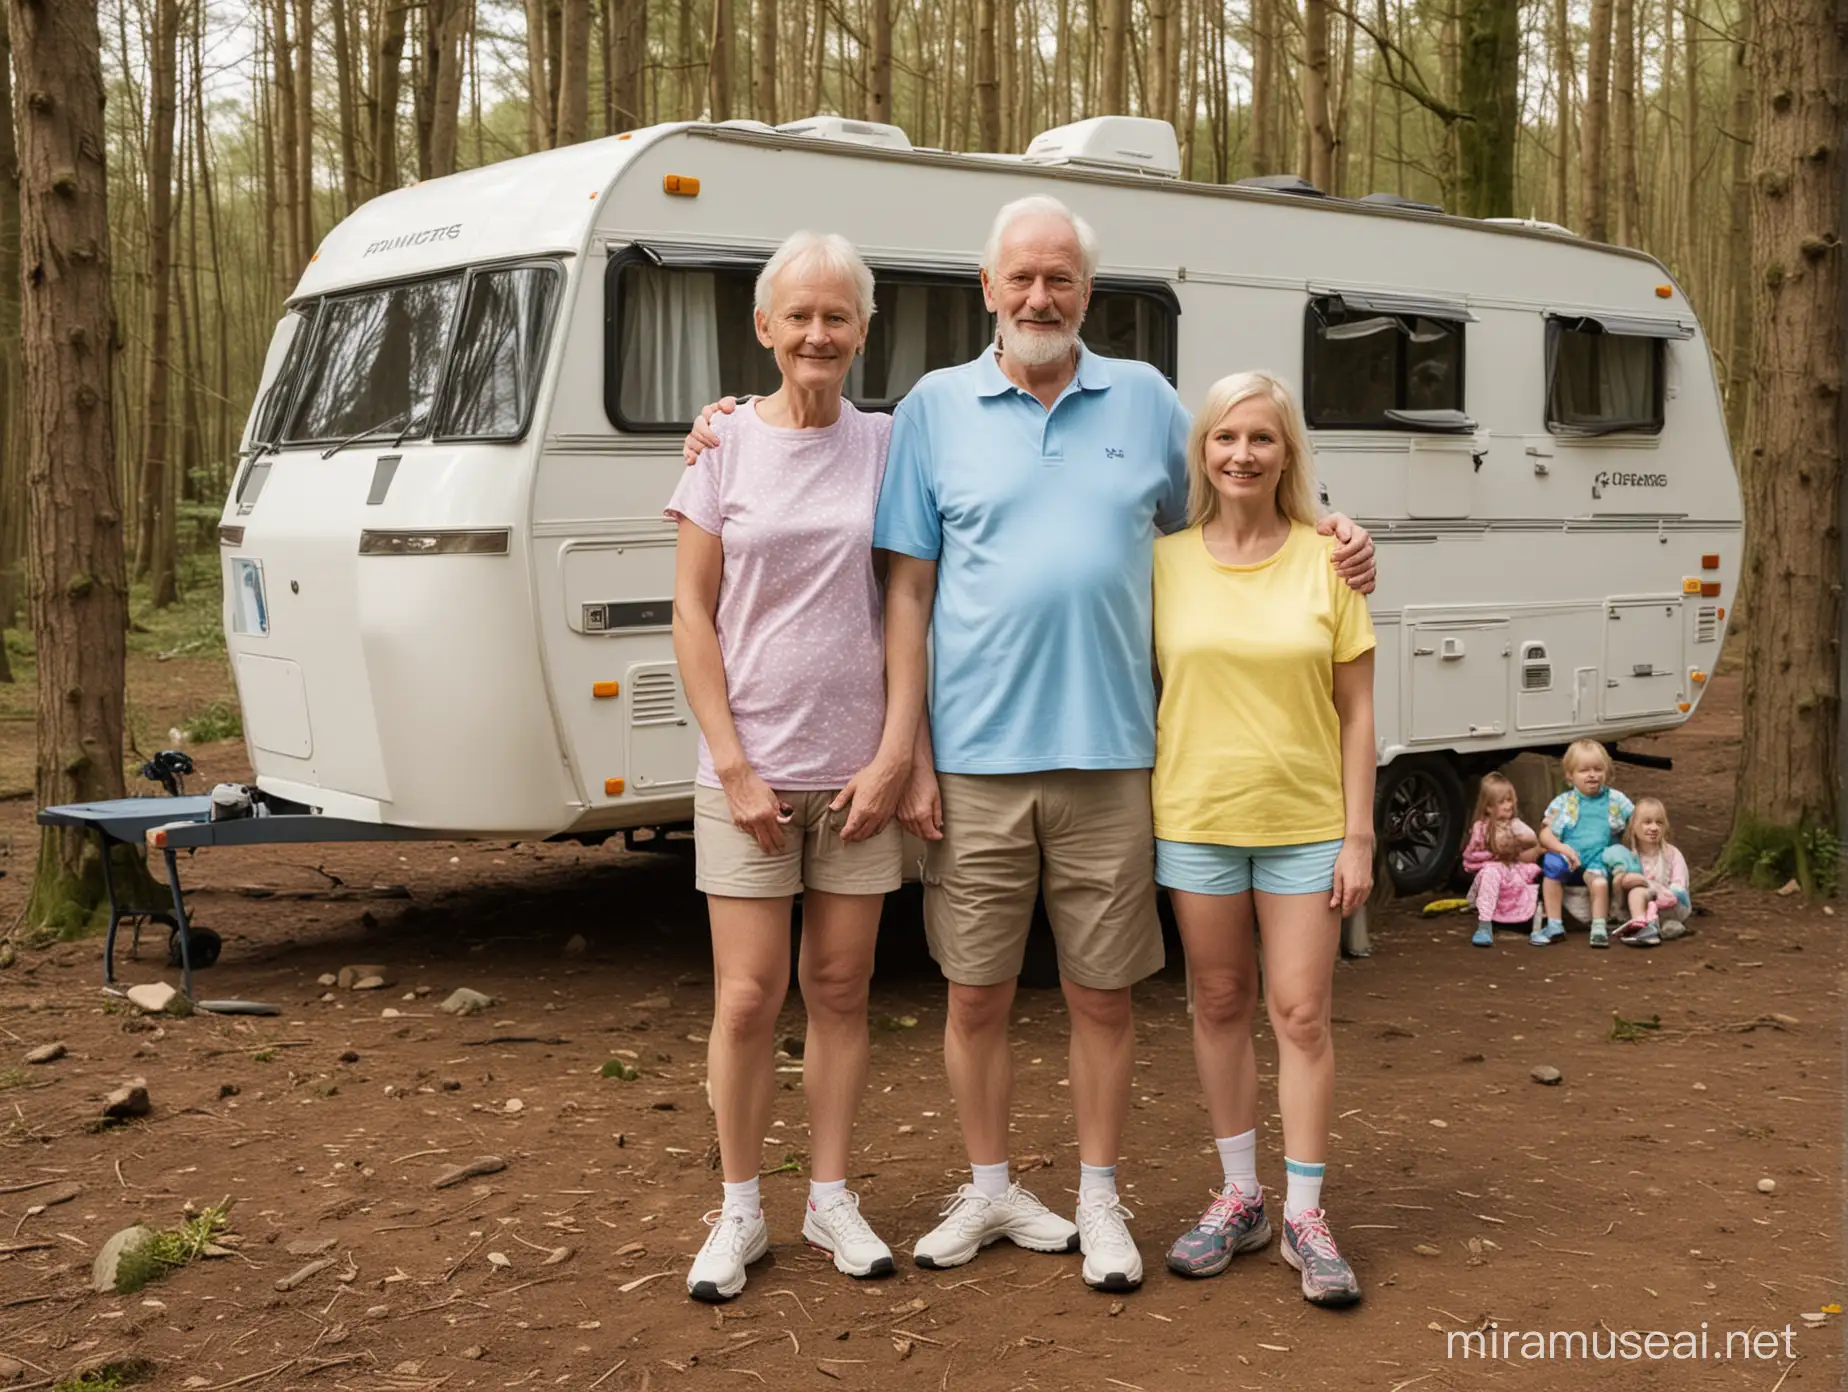 Elderly Couple Celebrating Easter in the Woods with Family